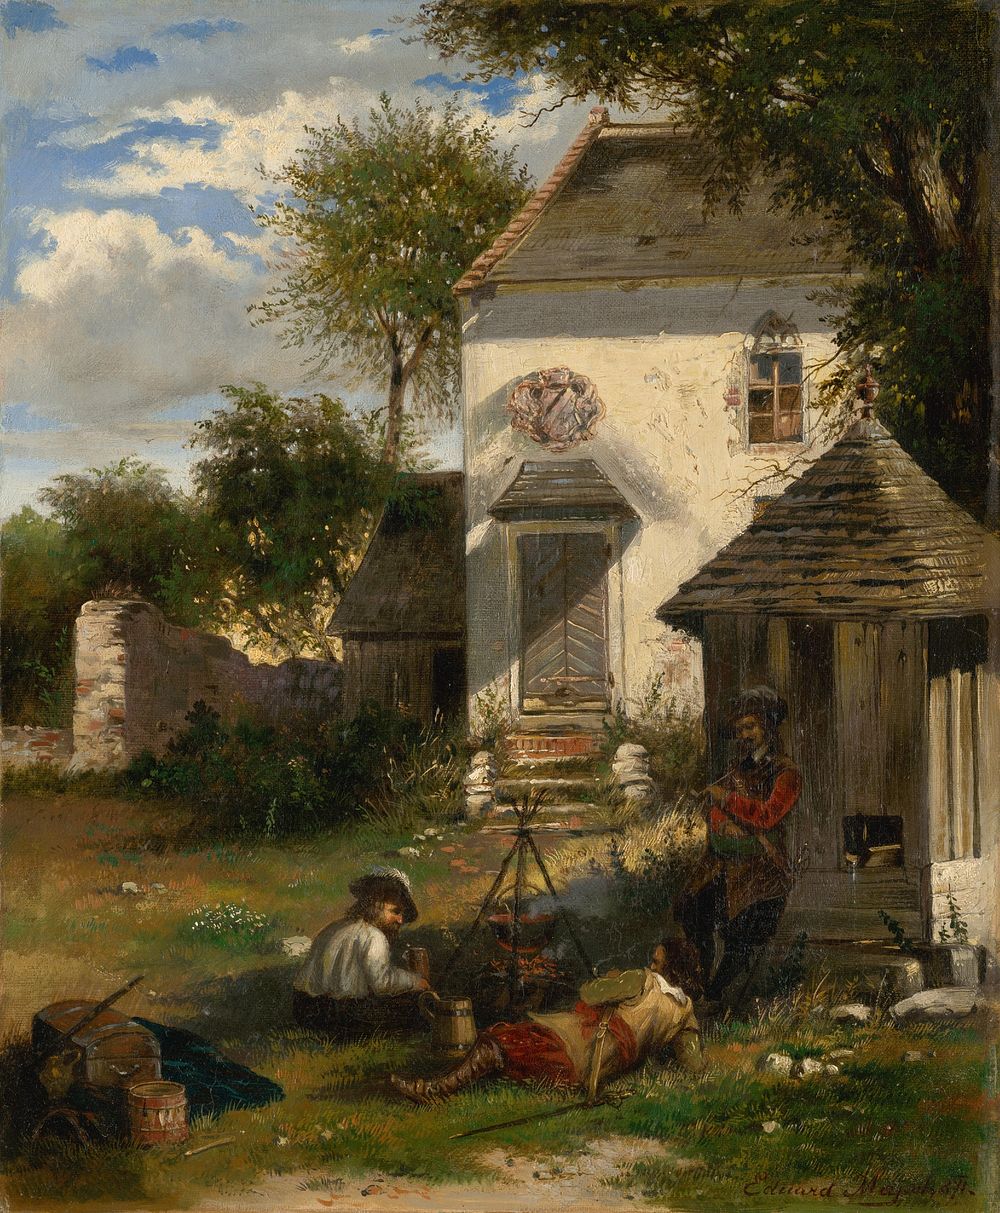 Soldiers camping in a nobleman's yard, motif from the thirty years' war, Eduard Majsch